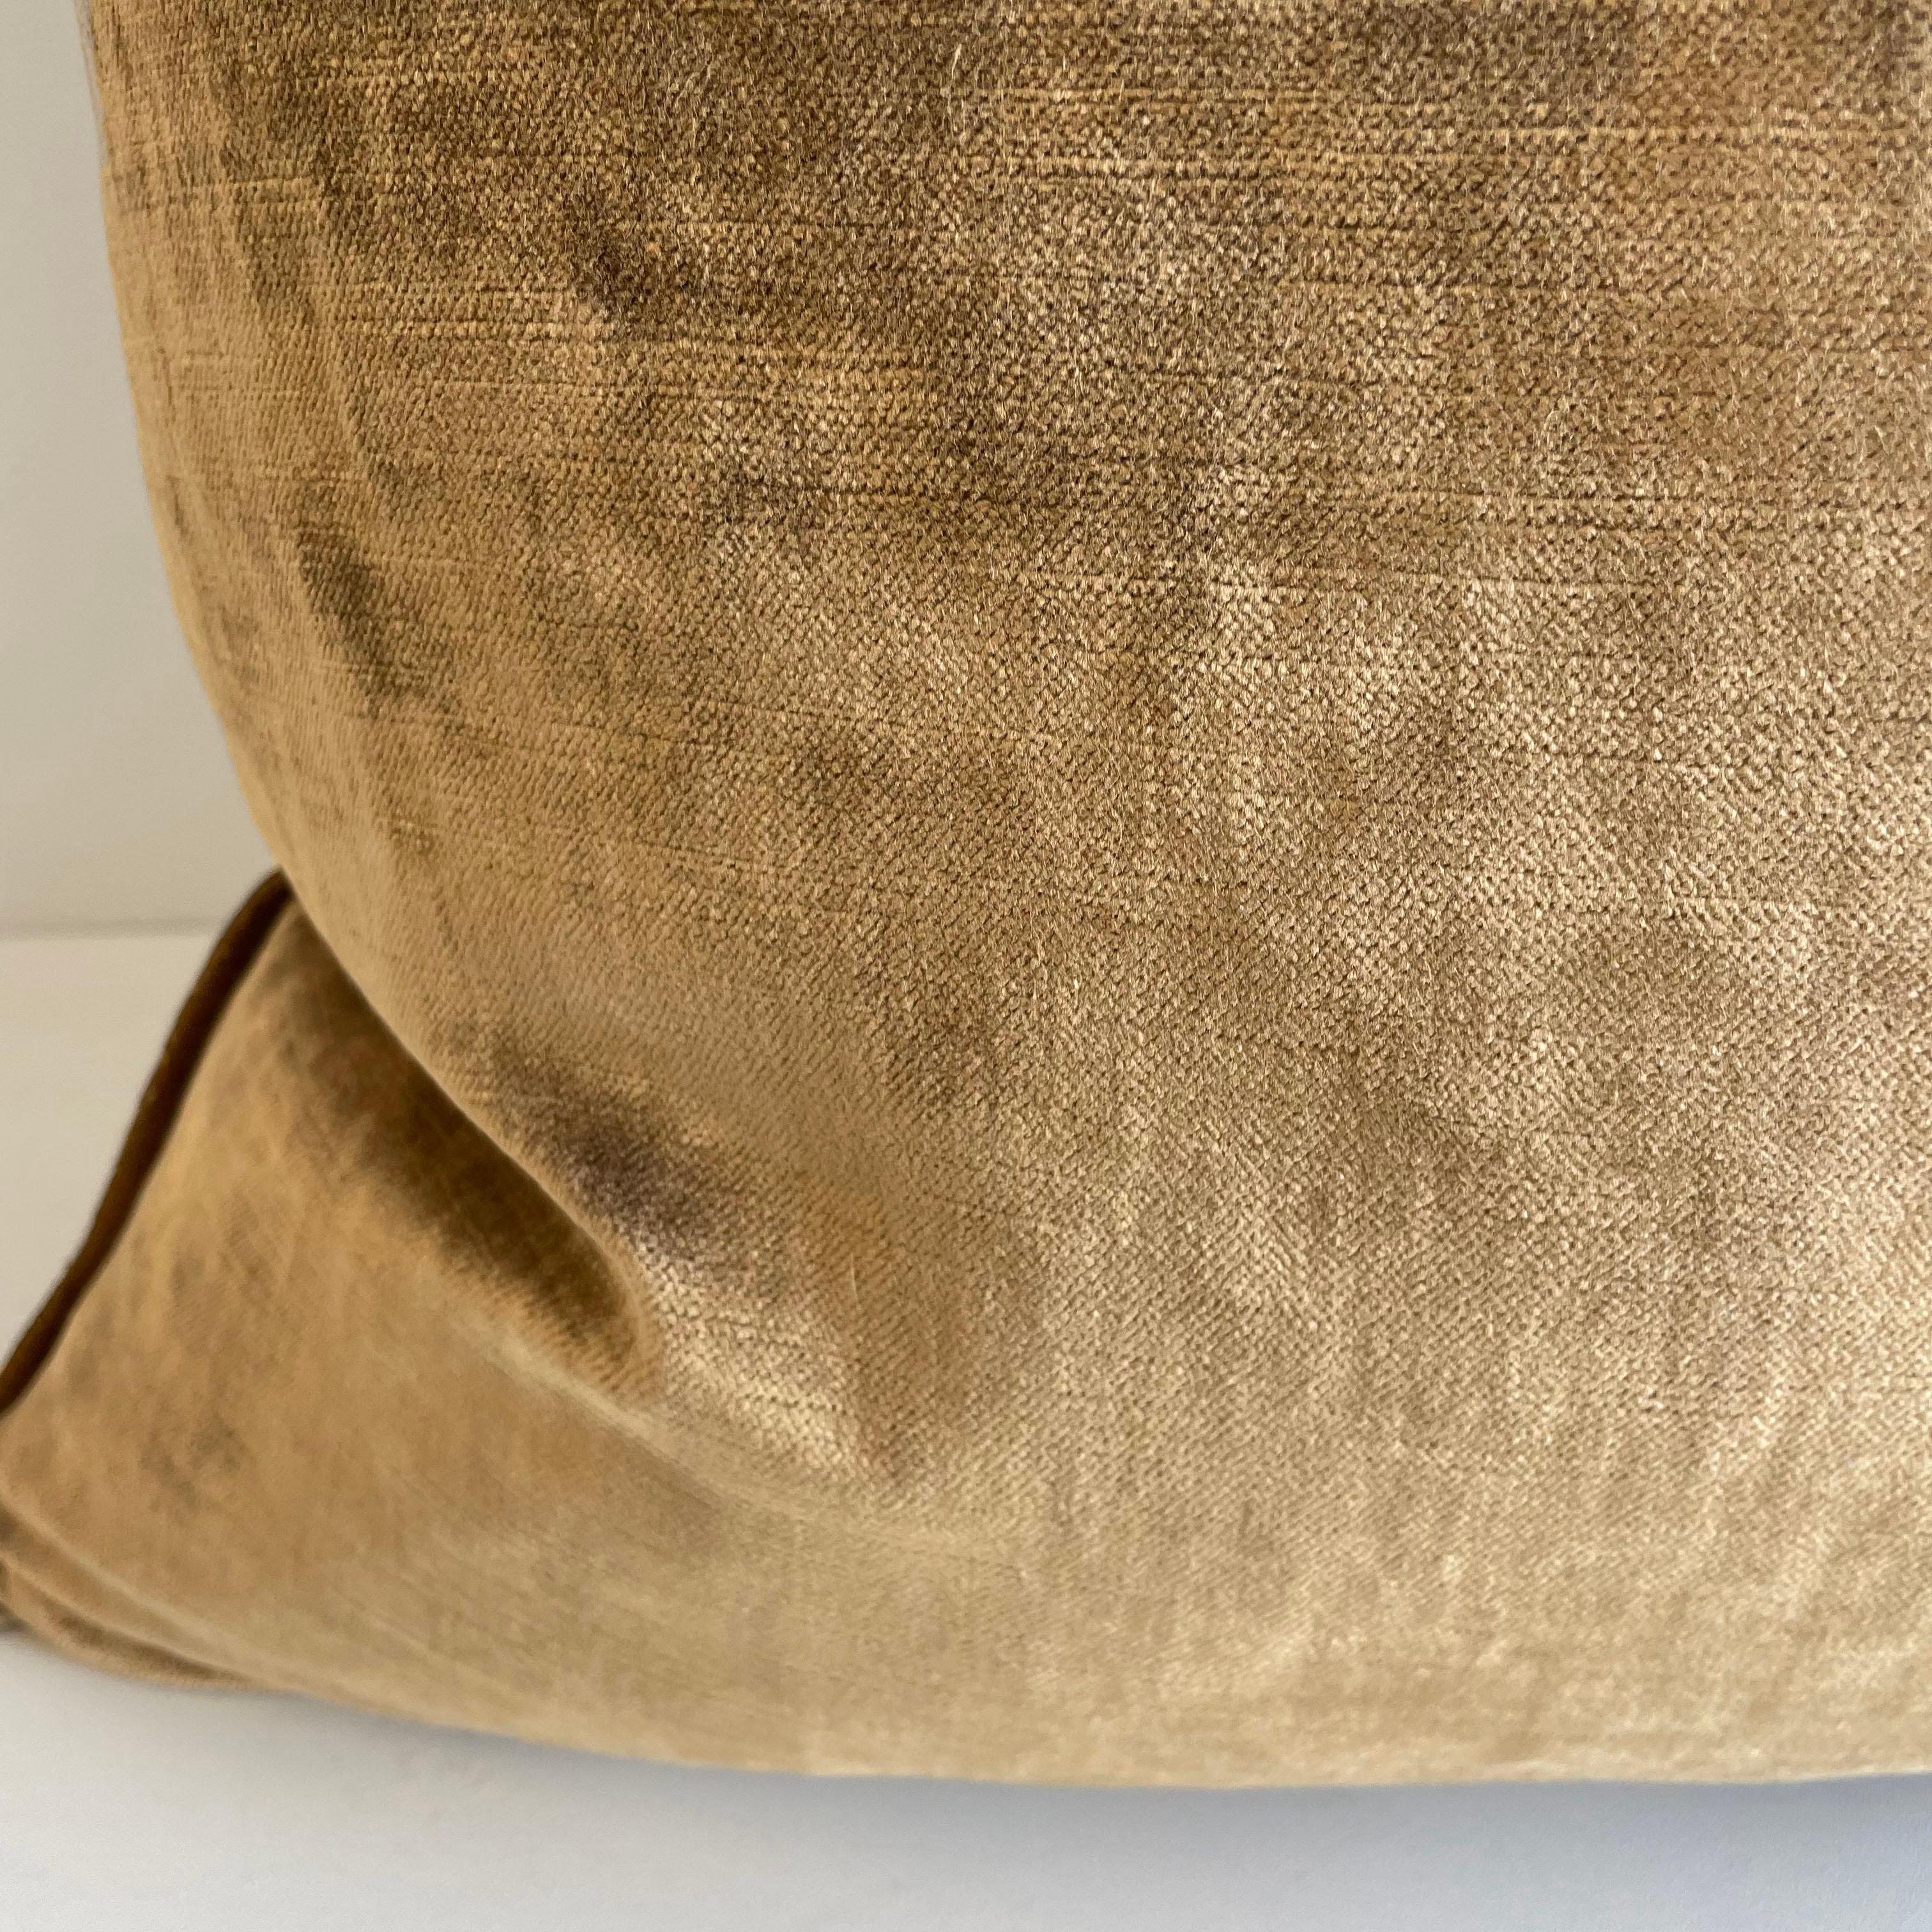 Beautiful French brown velvet pillow with binded edge. Metal zipper closure, and leather pull. Custom made in Paris, France. Includes Insert. 

Size: 20